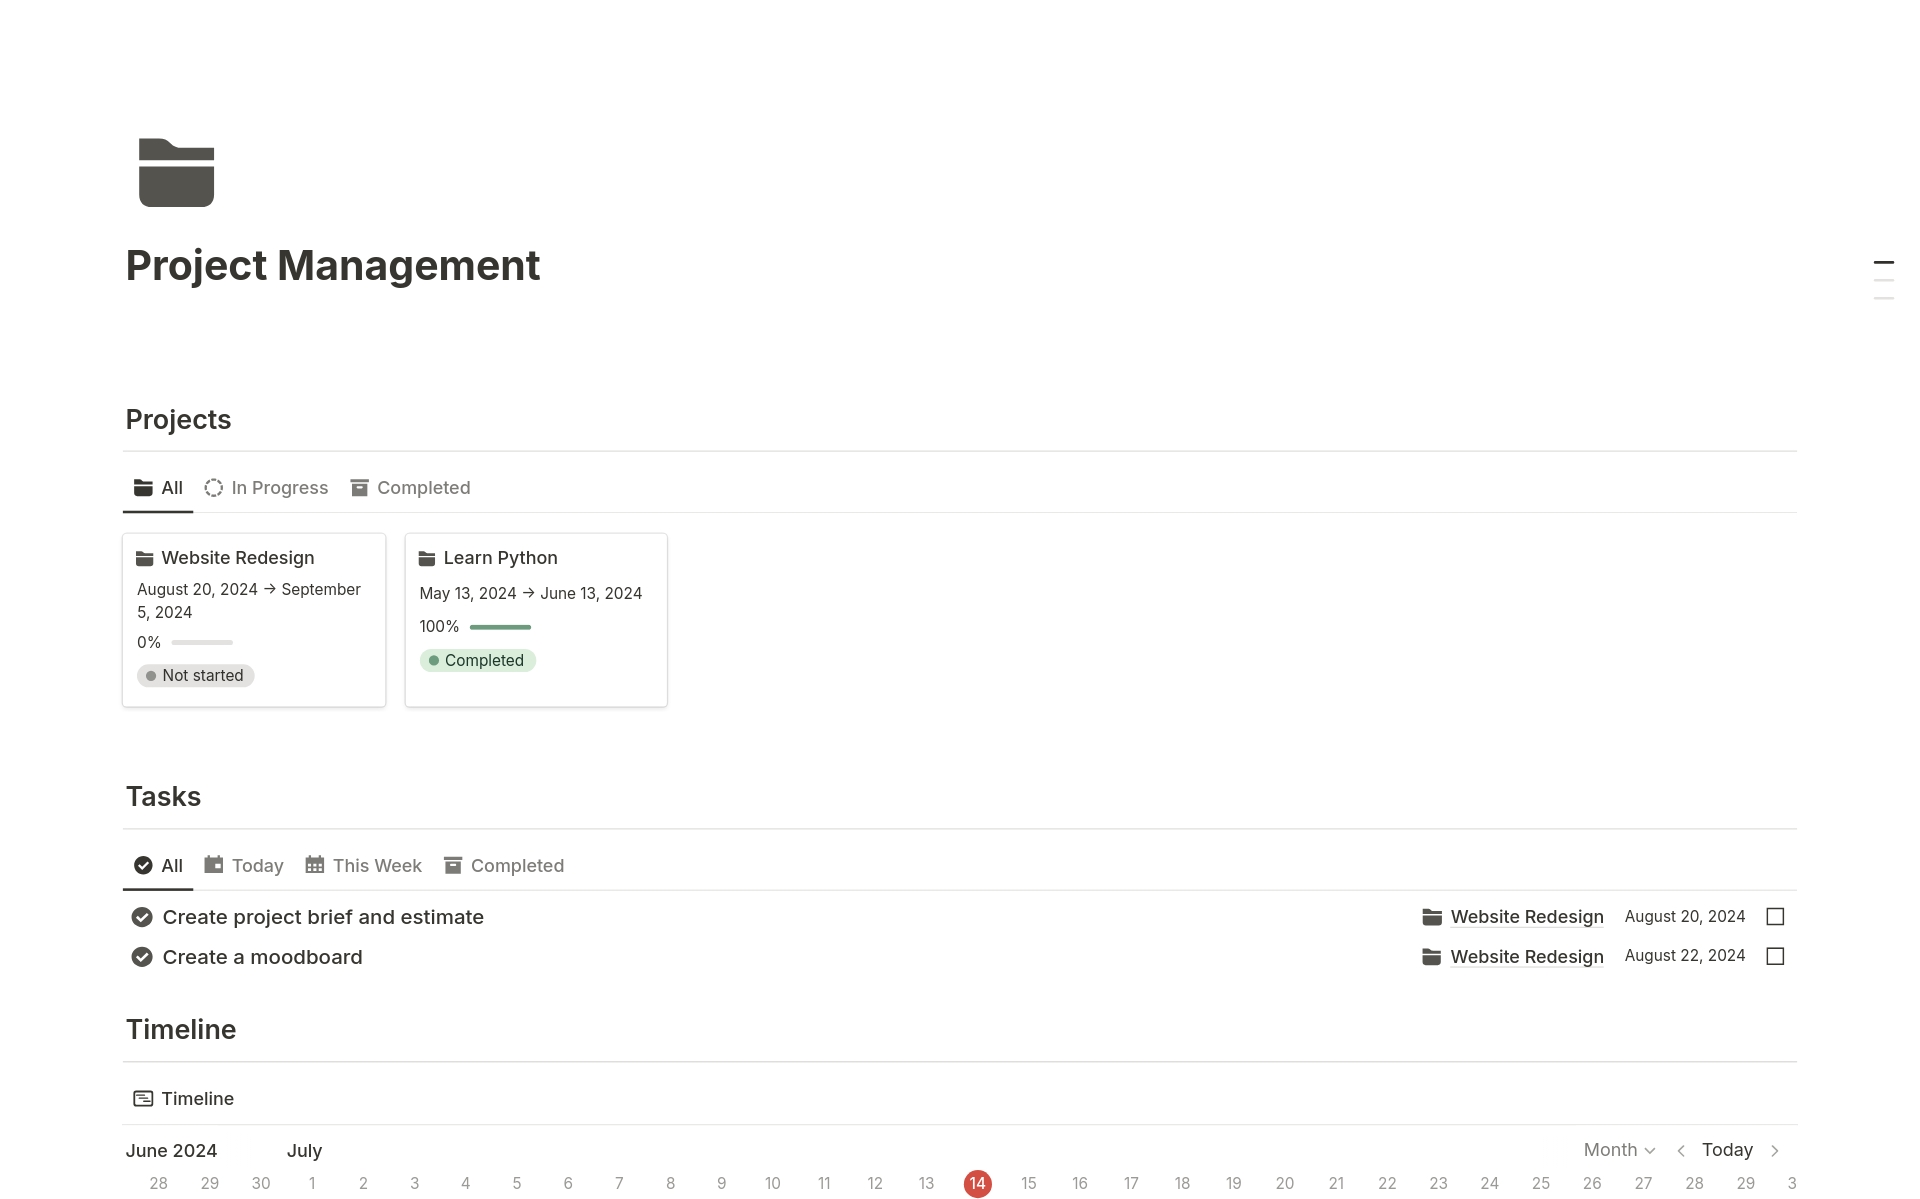 Manage your projects more simply and efficiently. With this template, you can manage your projects in one place, keep track of deadlines and status and plan each stage of your project without missing any deadlines.